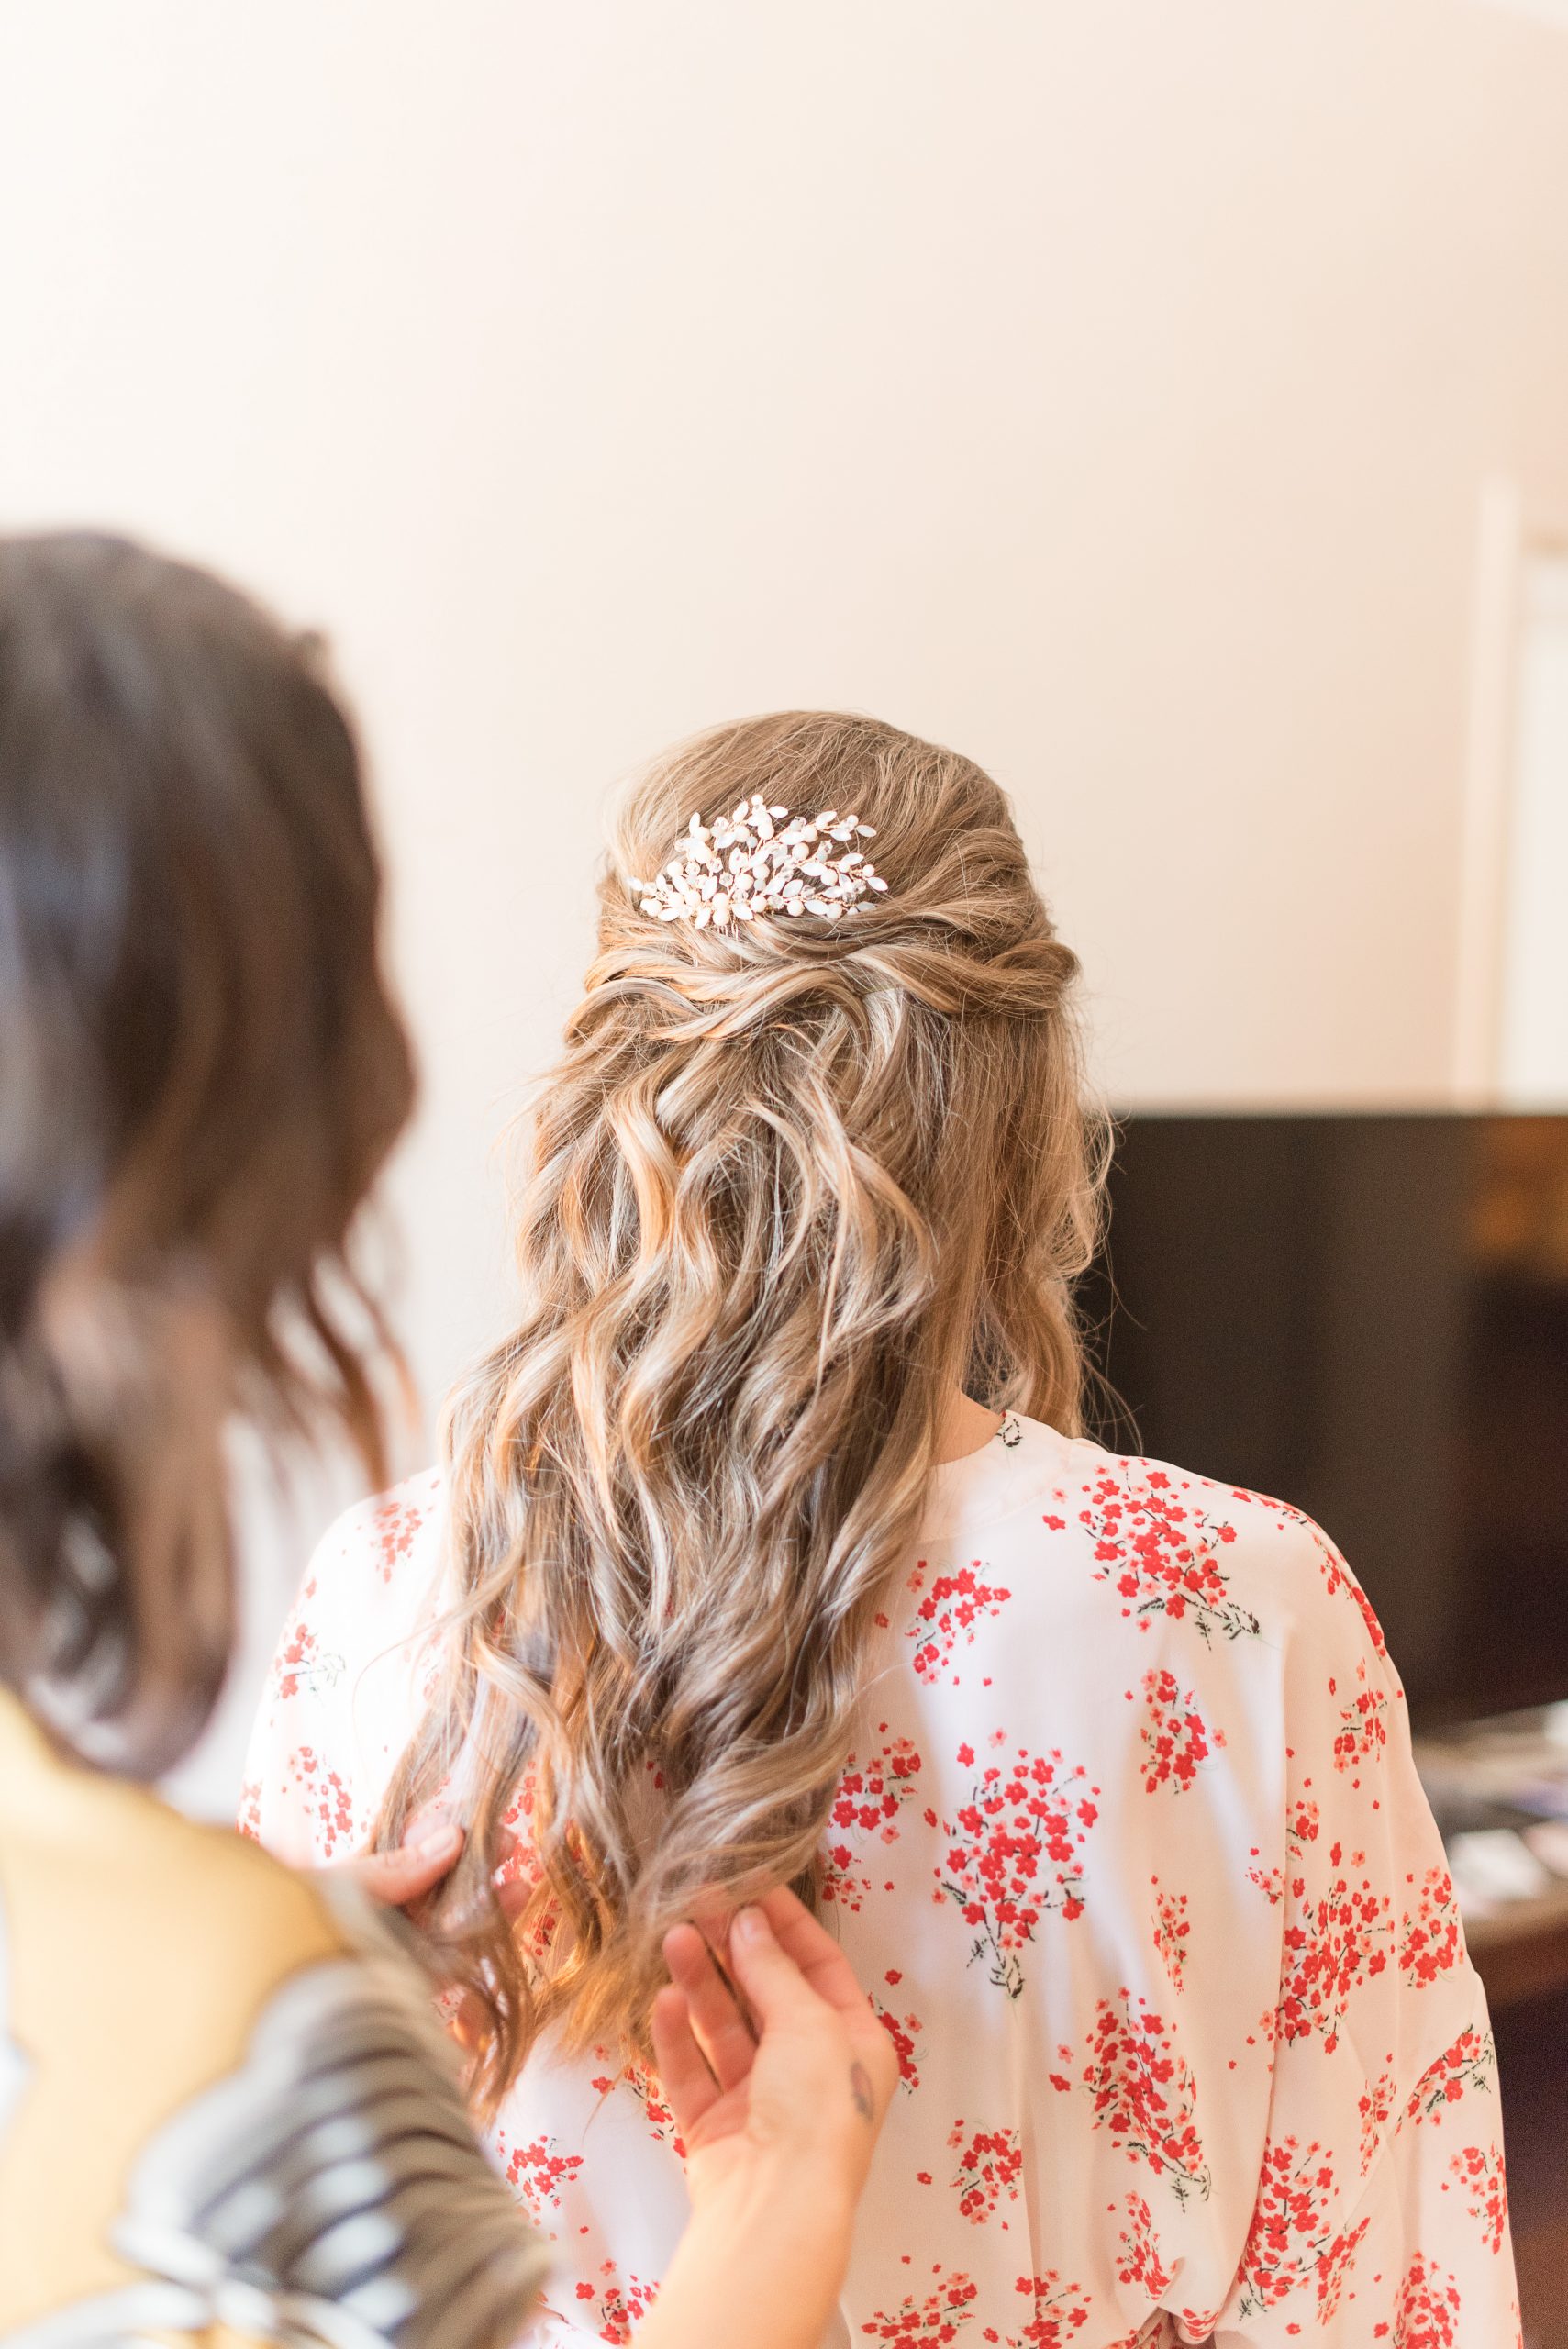 hair stylist finishing up details on bride's hair on wedding day